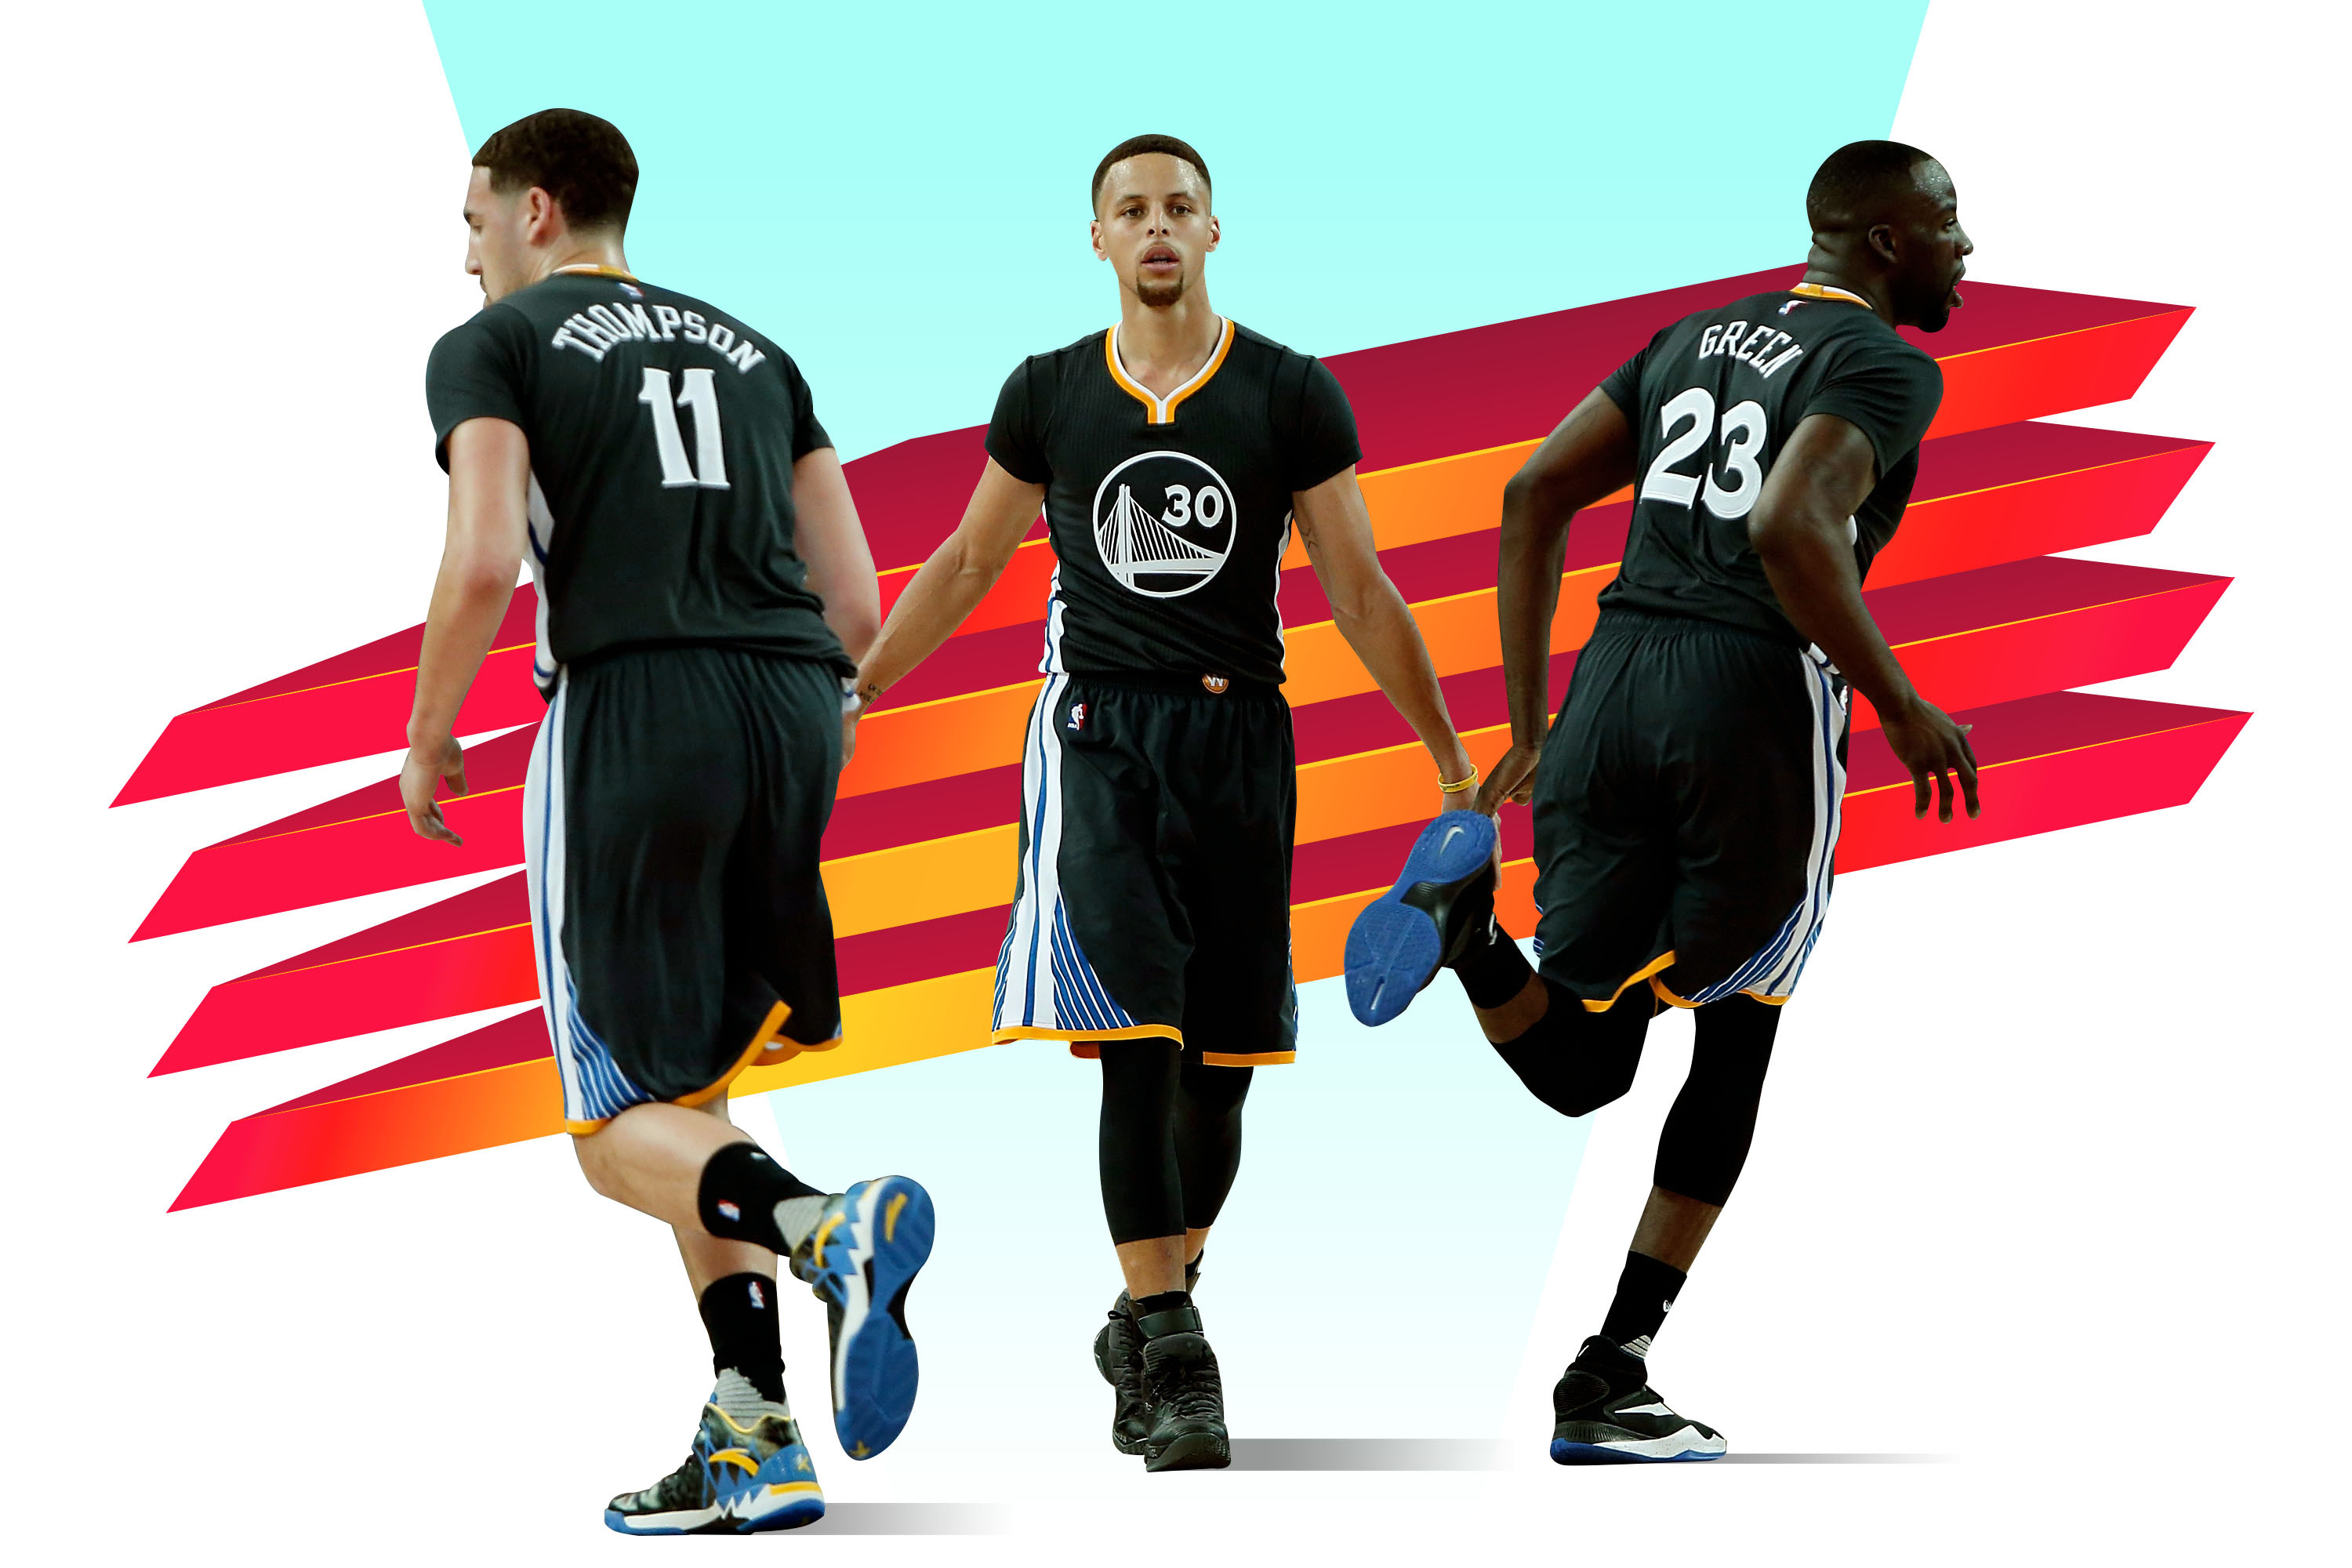 Klay Thompson, Stephen Curry and Draymond Green of the Golden State Warriors. (Lachlan Cunningham/Getty)